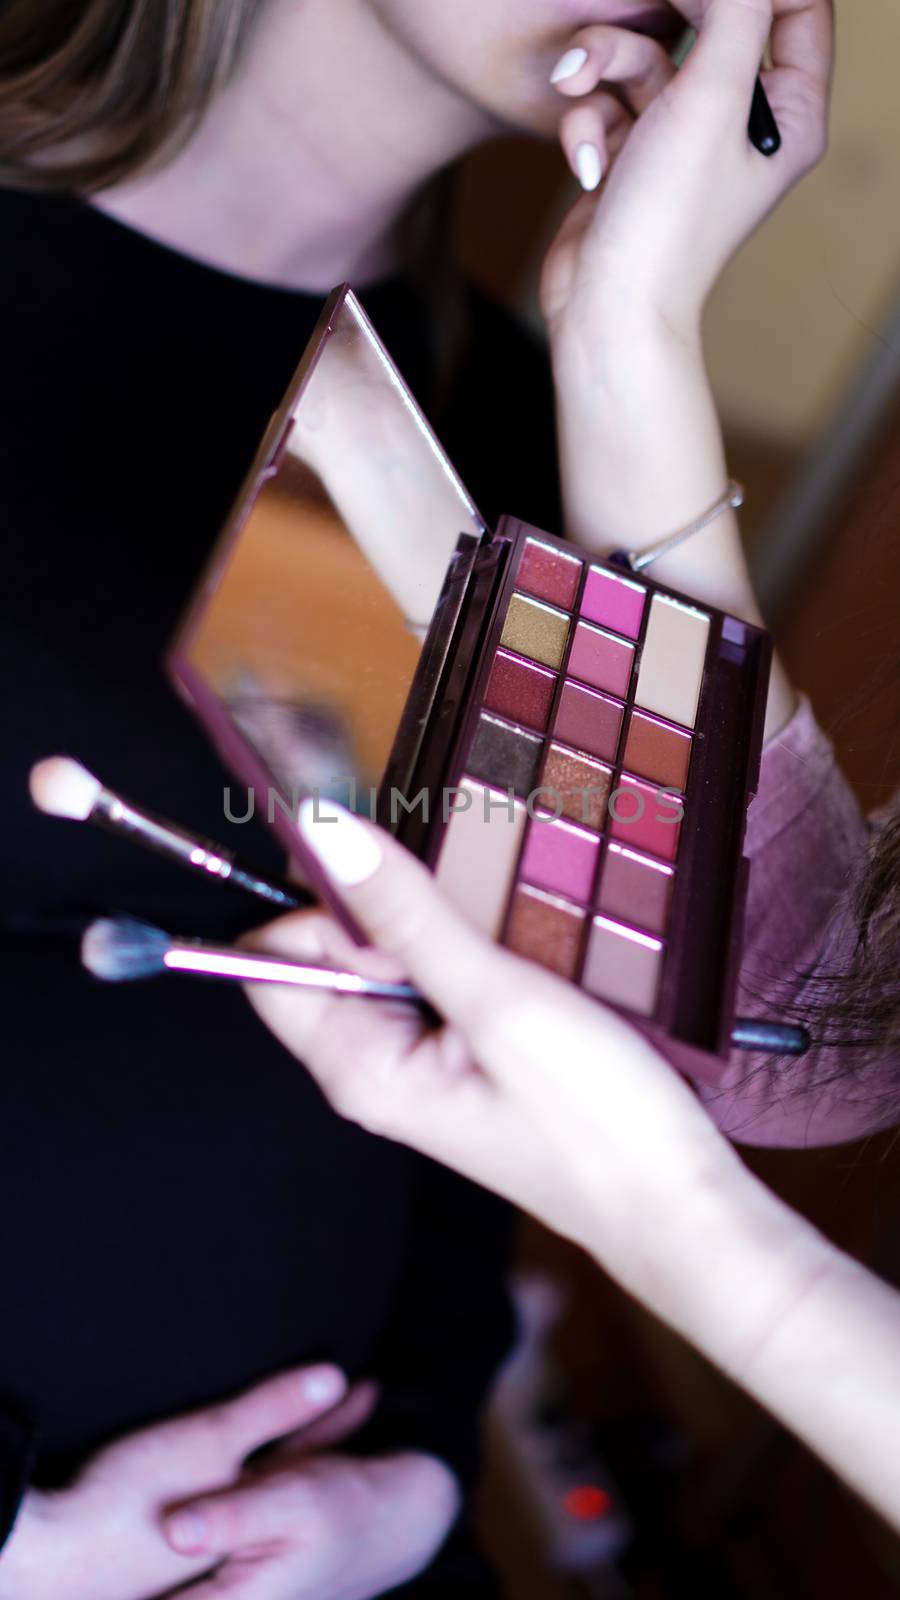 Hand use palette colorful and brush set makeup, beauty and fashion. Preparing make-up for the celebration, photo shoot